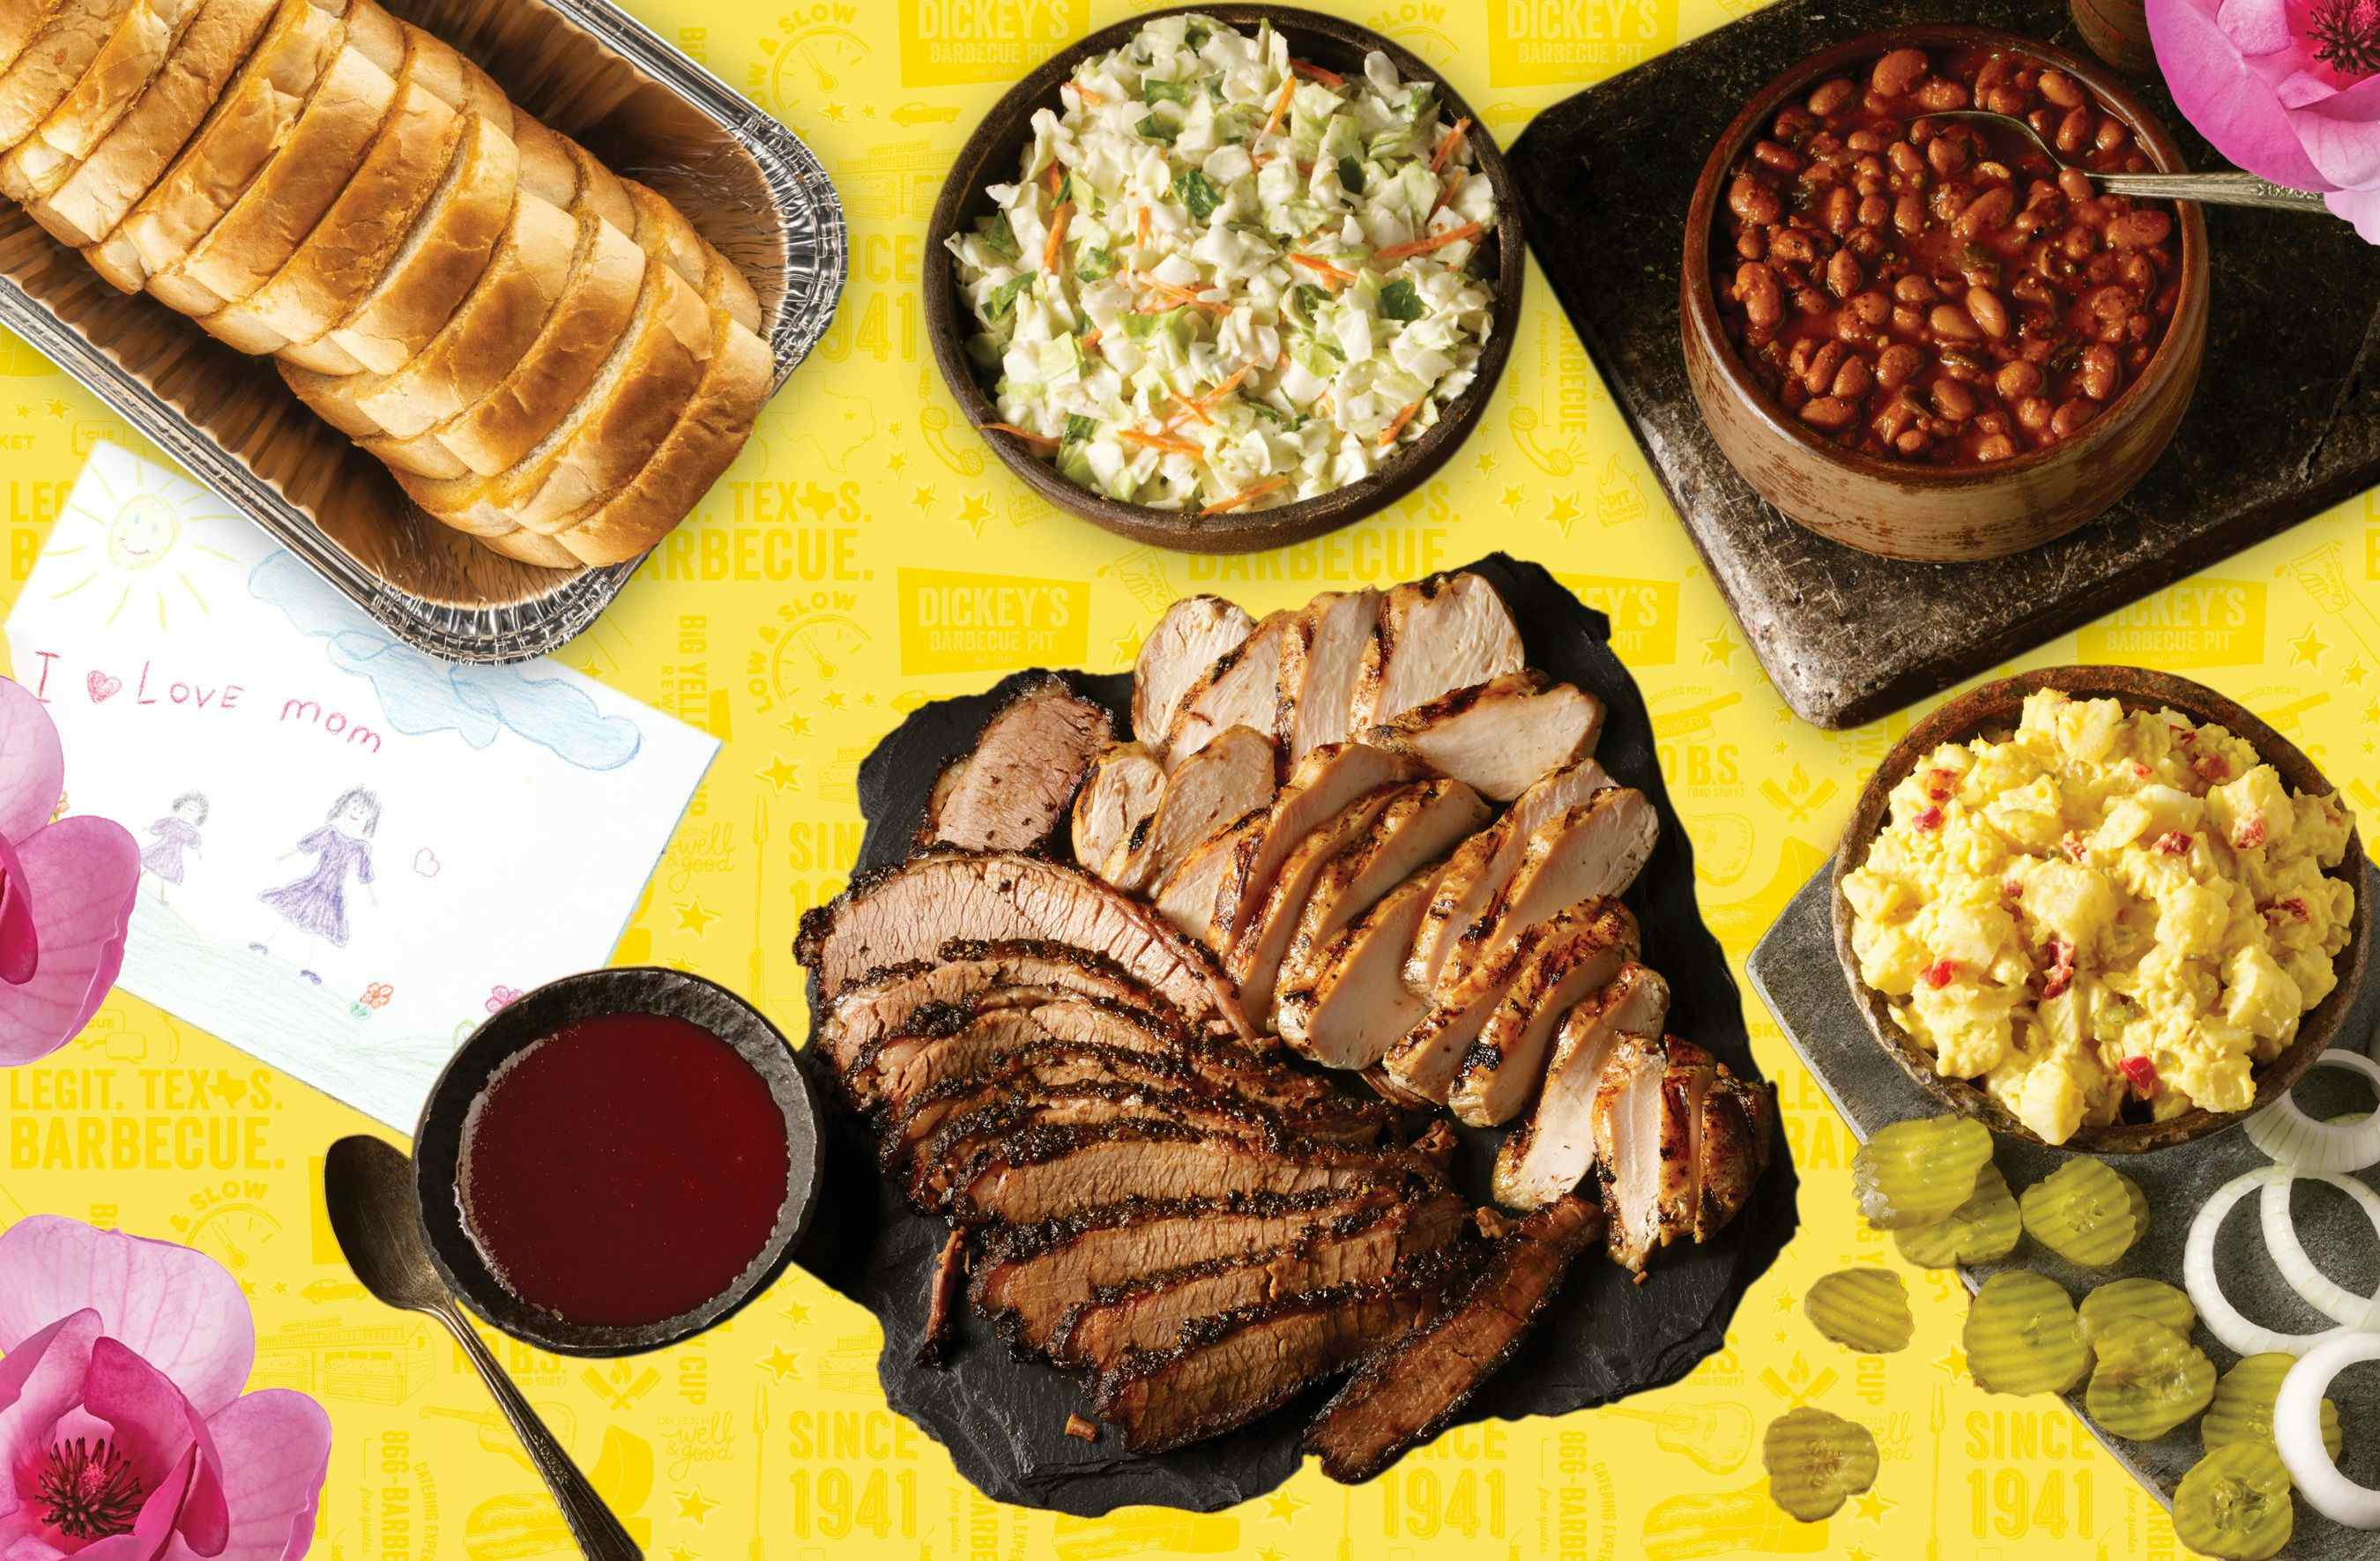 Kids Eat Free on Mother’s Day at Dickey’s Barbecue Pit